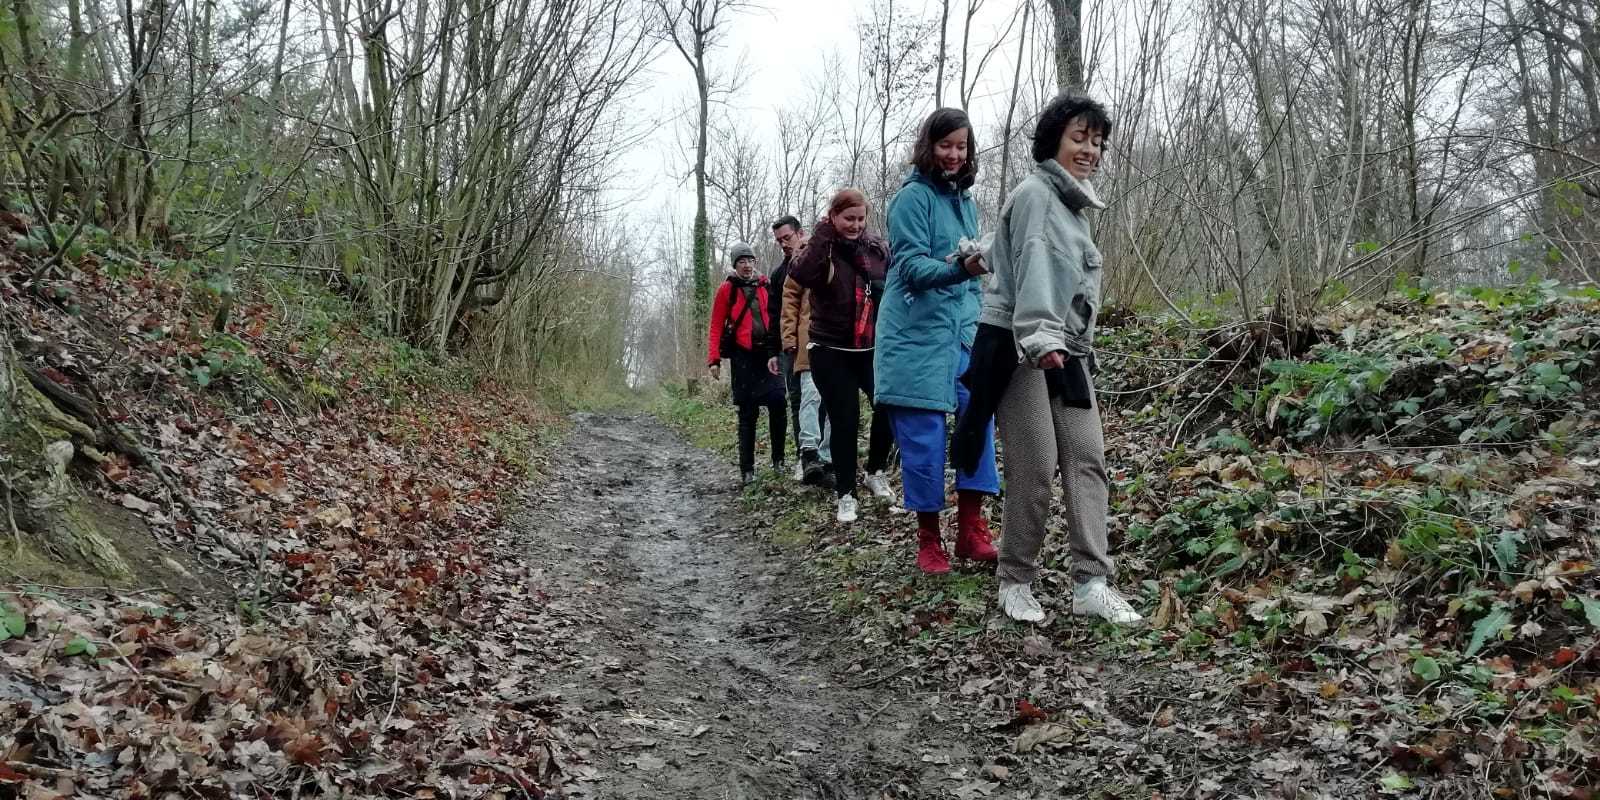 COOP study group: Performing the Living )) (( Living the Performing on a walking exercise, Epen 2020. Photo credits  Jose Iglesias Gª-Arenal